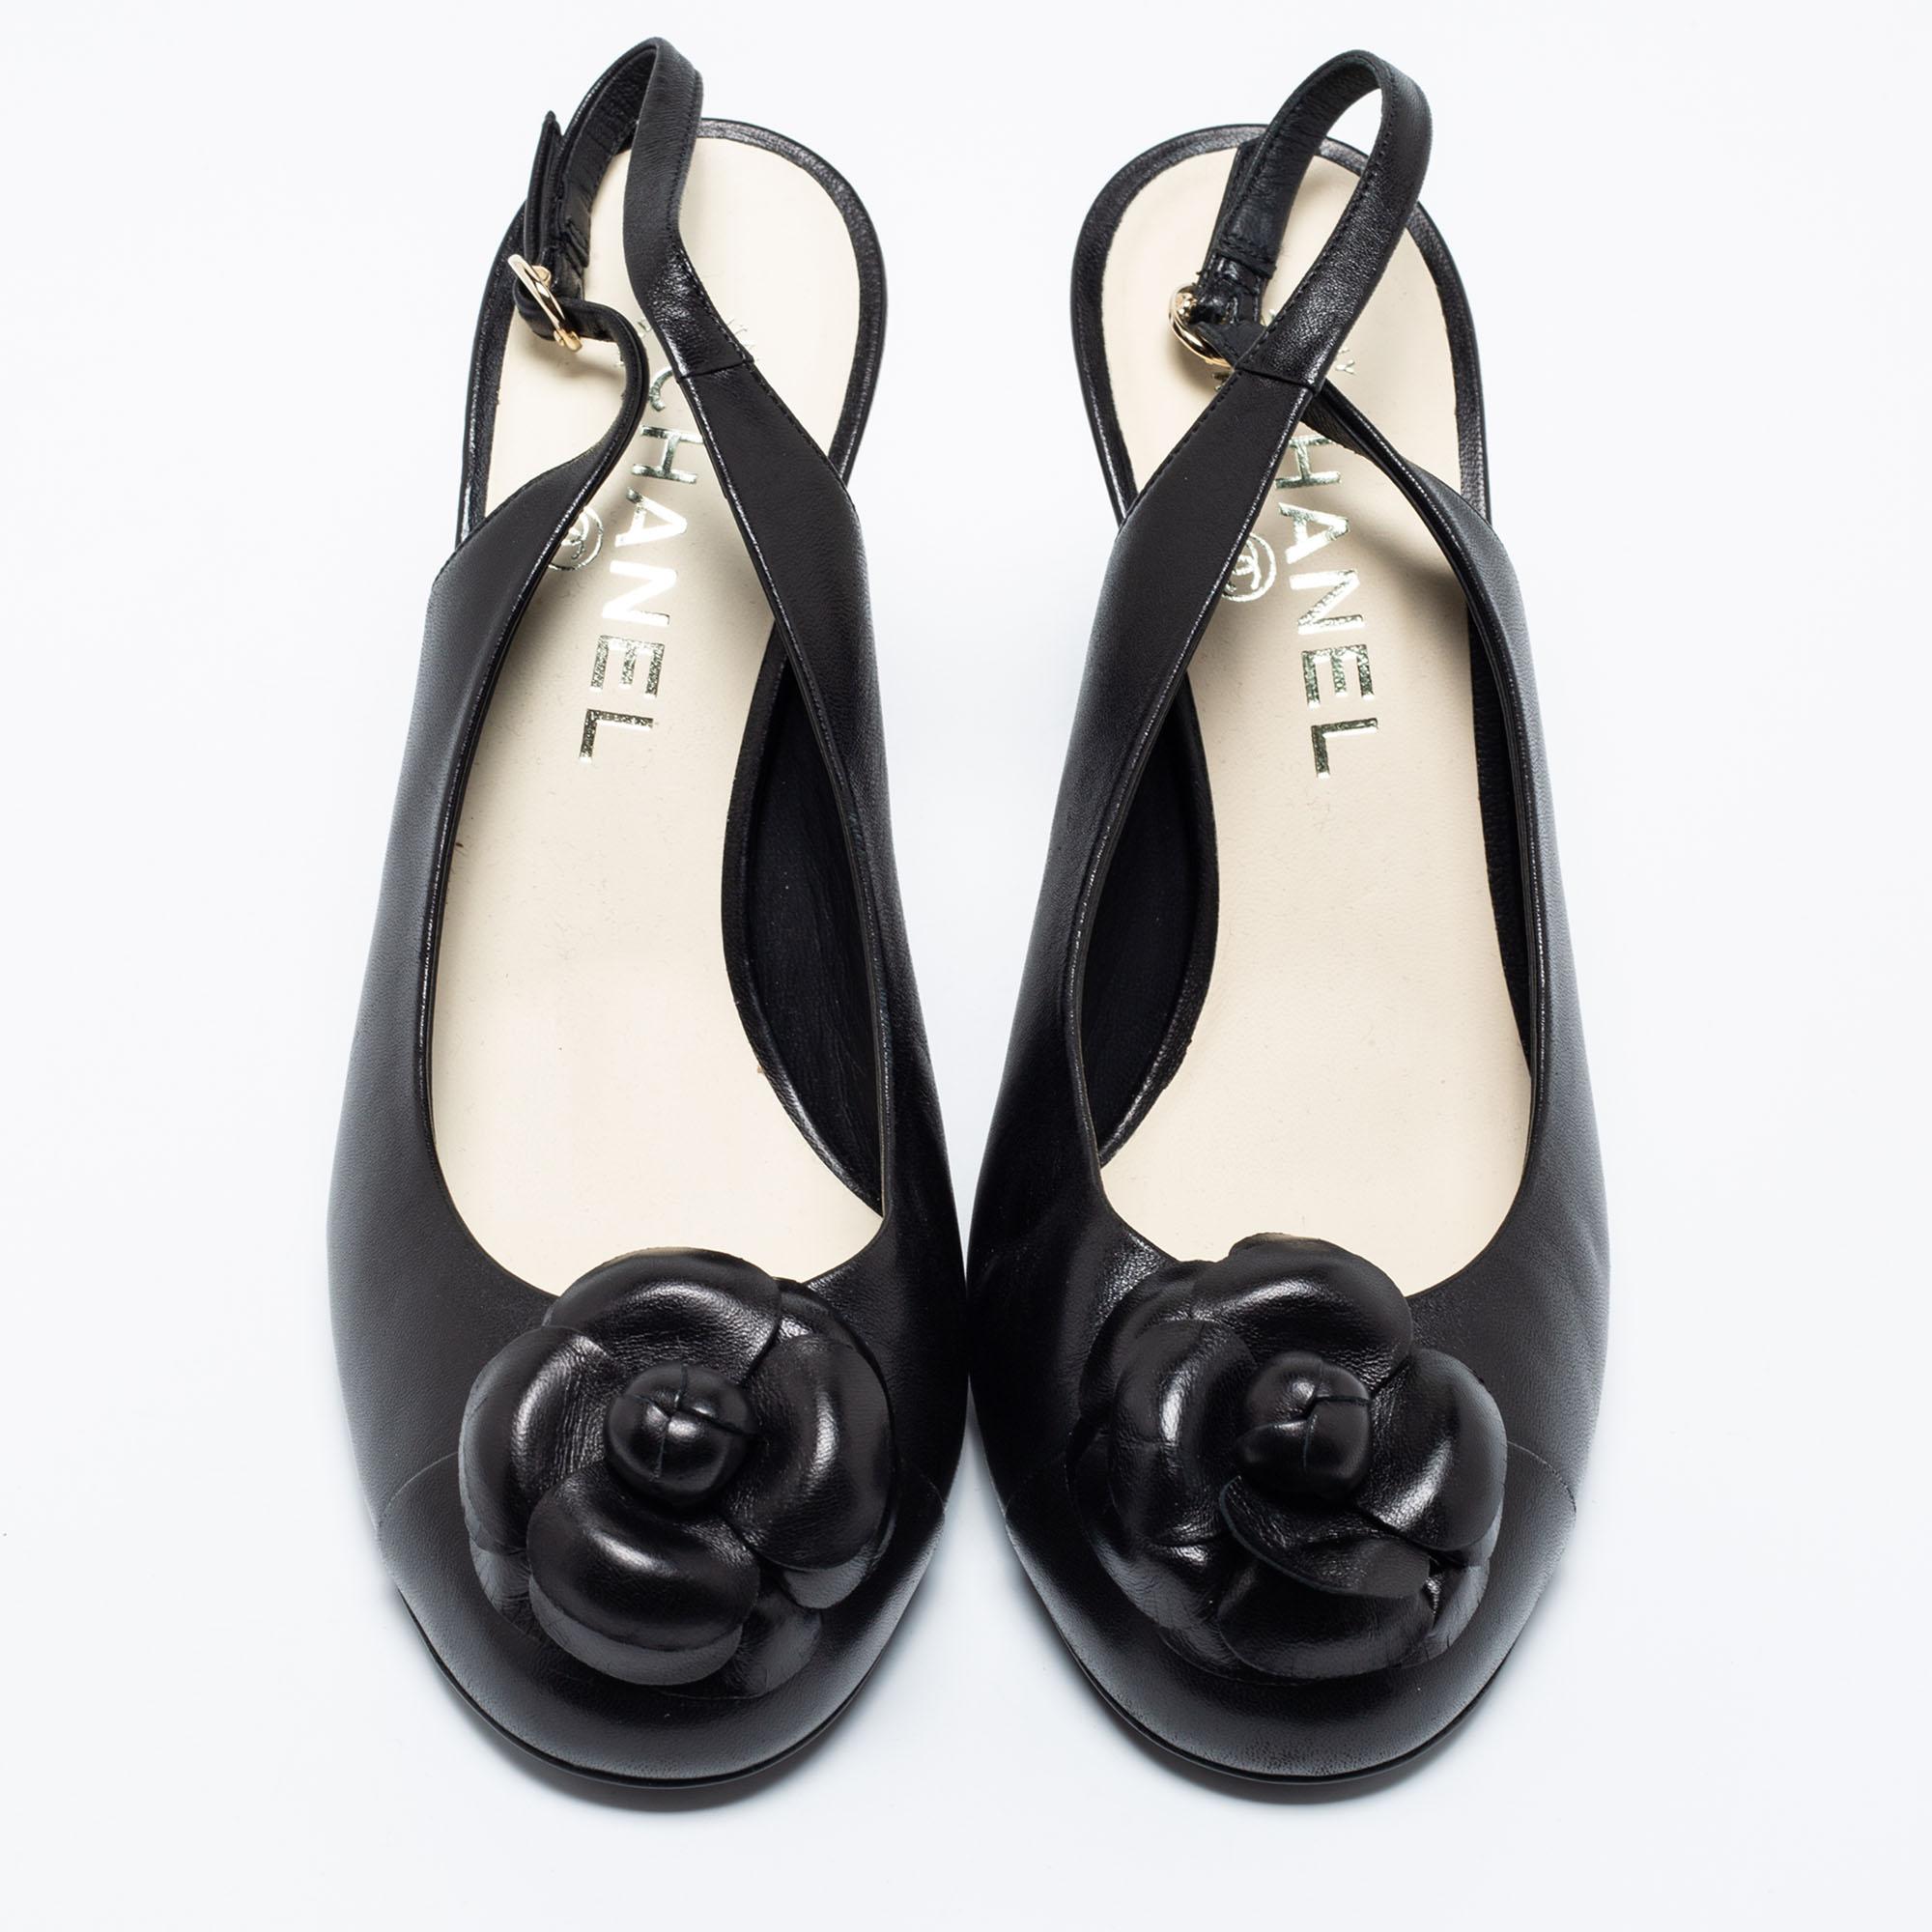 You'll get elevated comfort with these Chanel slingback sandals. They have covered toes, camellia detailing, and slim heels. Wear yours with everything from dresses to a blouse & jeans.

Includes: Original Dustbag
